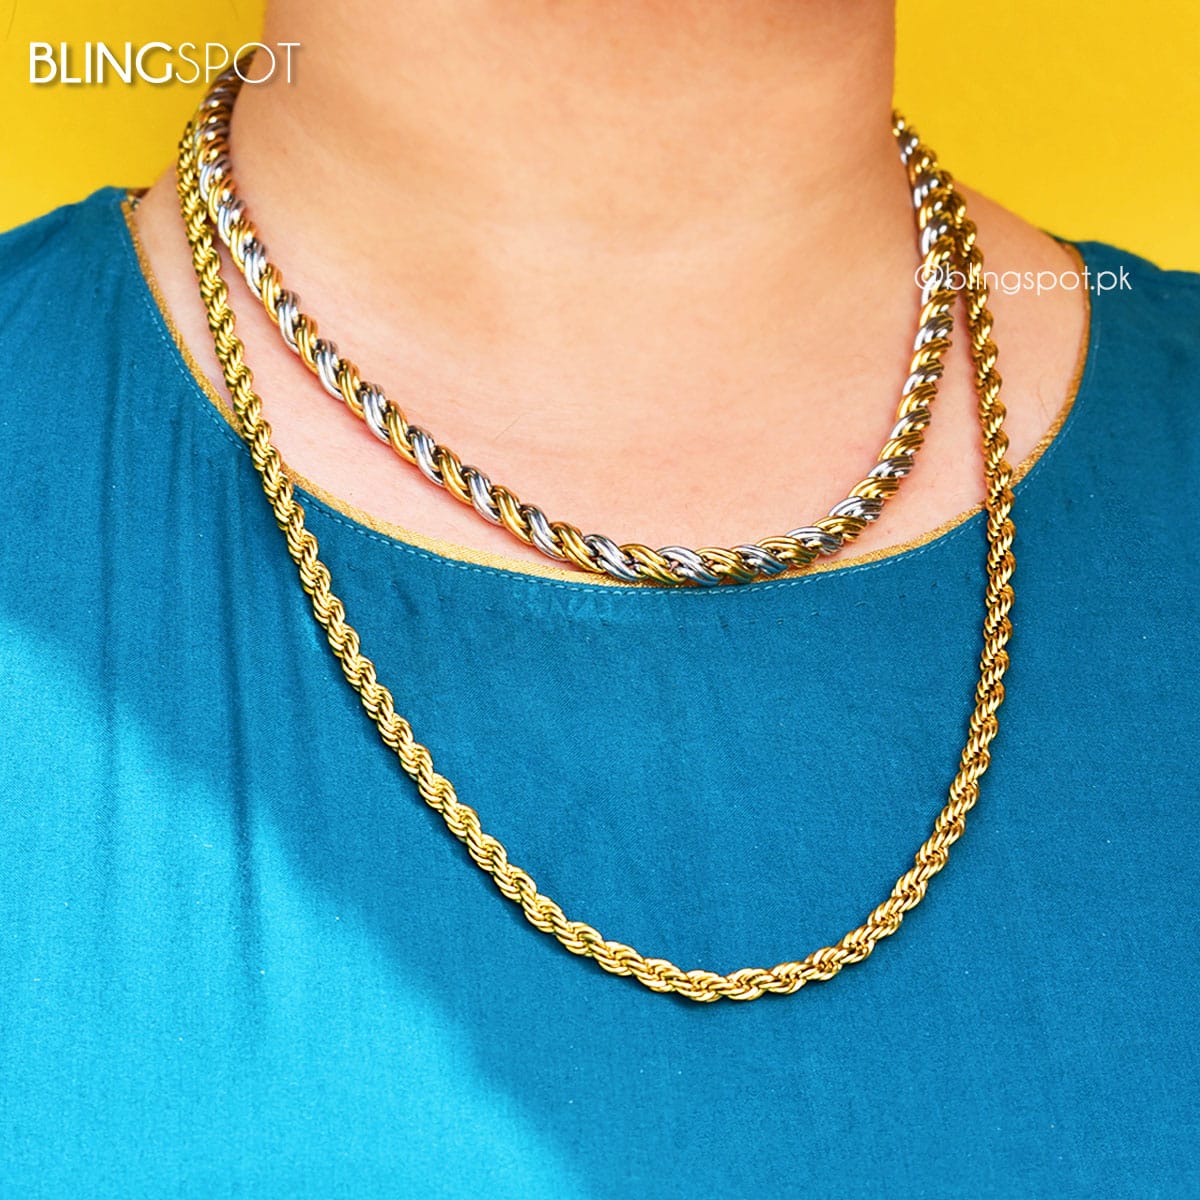 Chunky Chain Style 2 - Necklace